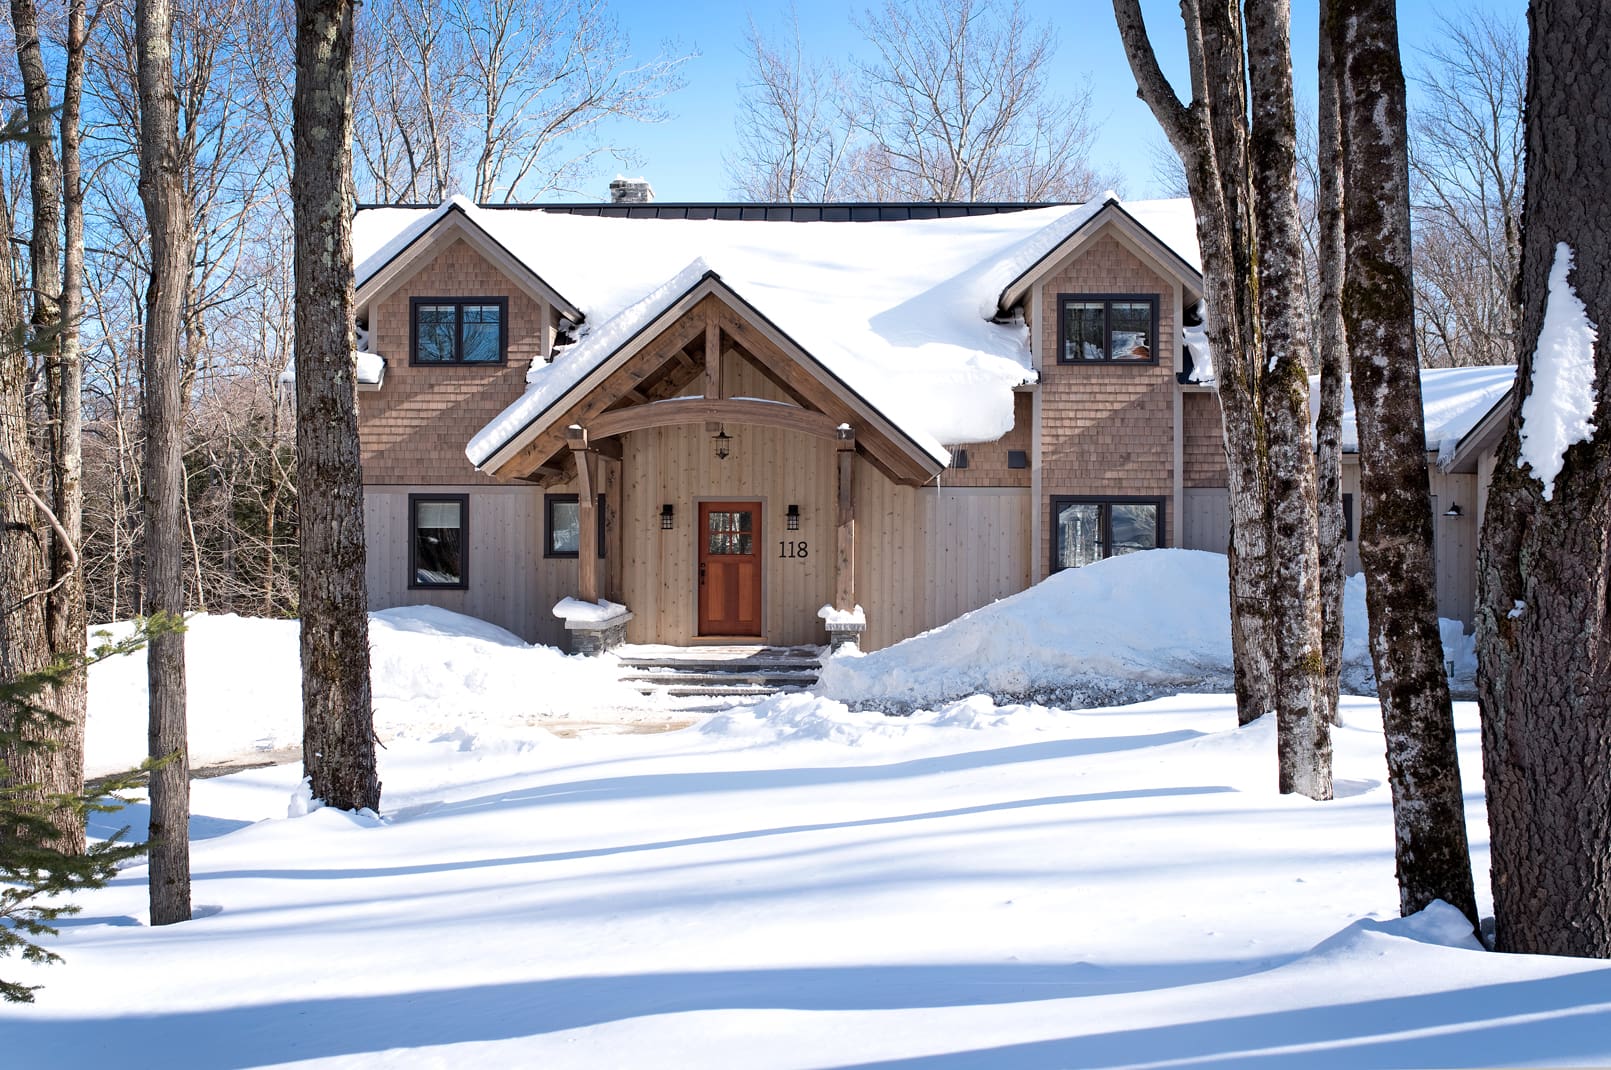 A modern craftsman style home after a snowfall